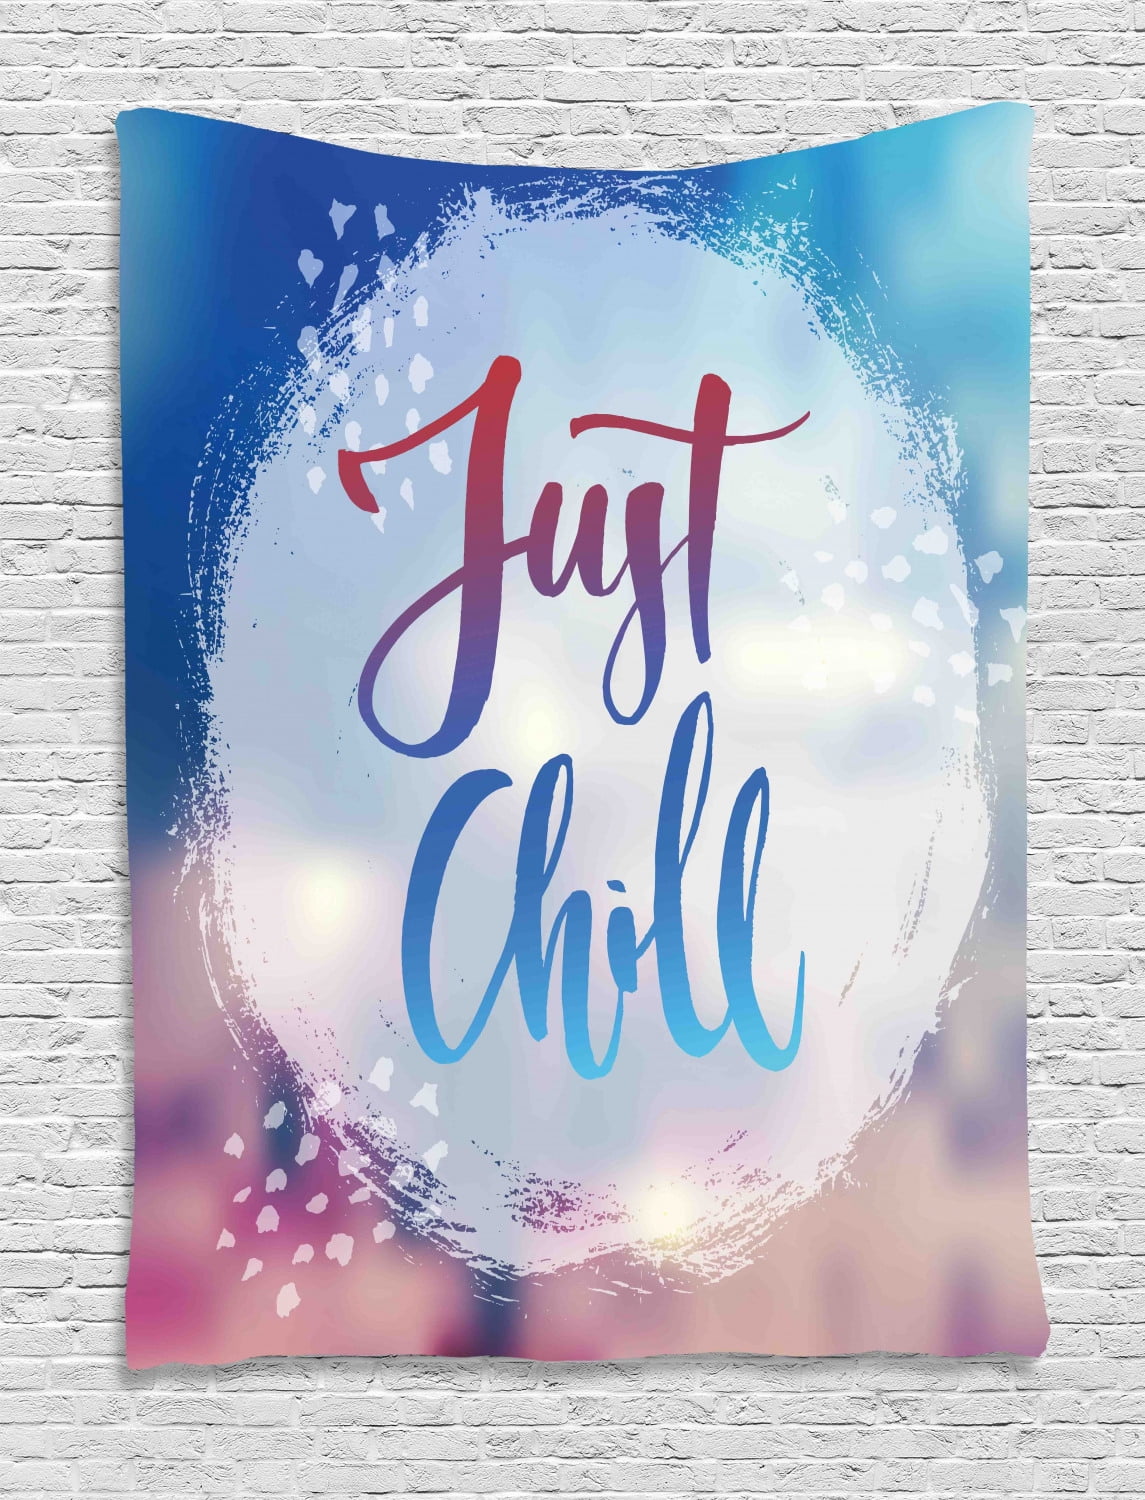 Just Chill Tapestry, Silhouette of Words Placed inside a Circular Paint Blob on a Blurred ...